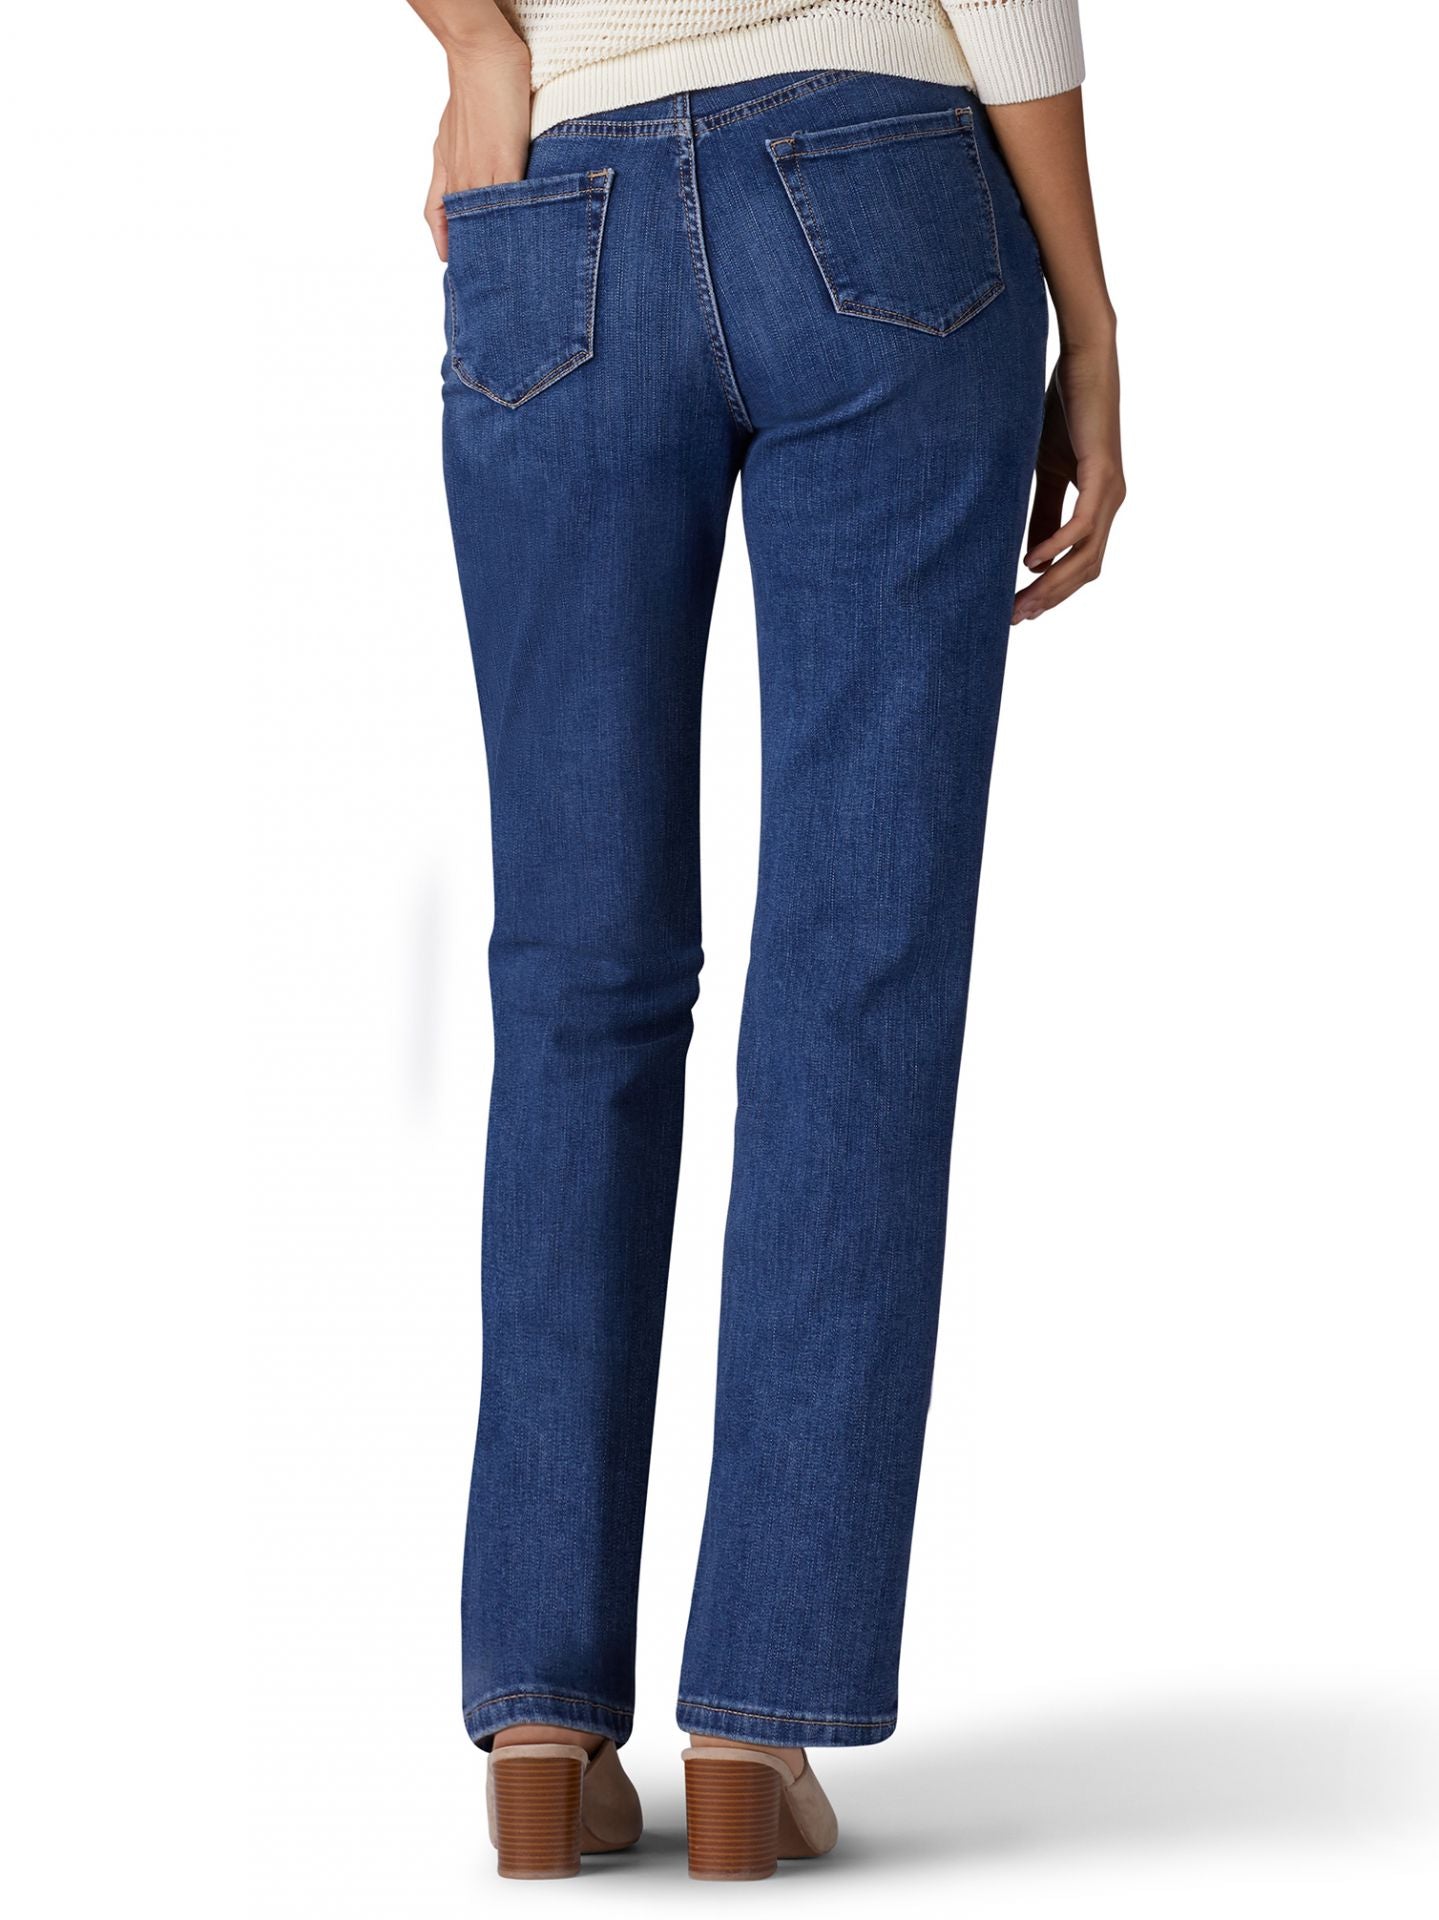 Women's Instantly Slims Classic Relaxed Fit Straight Leg Jean - Seattle